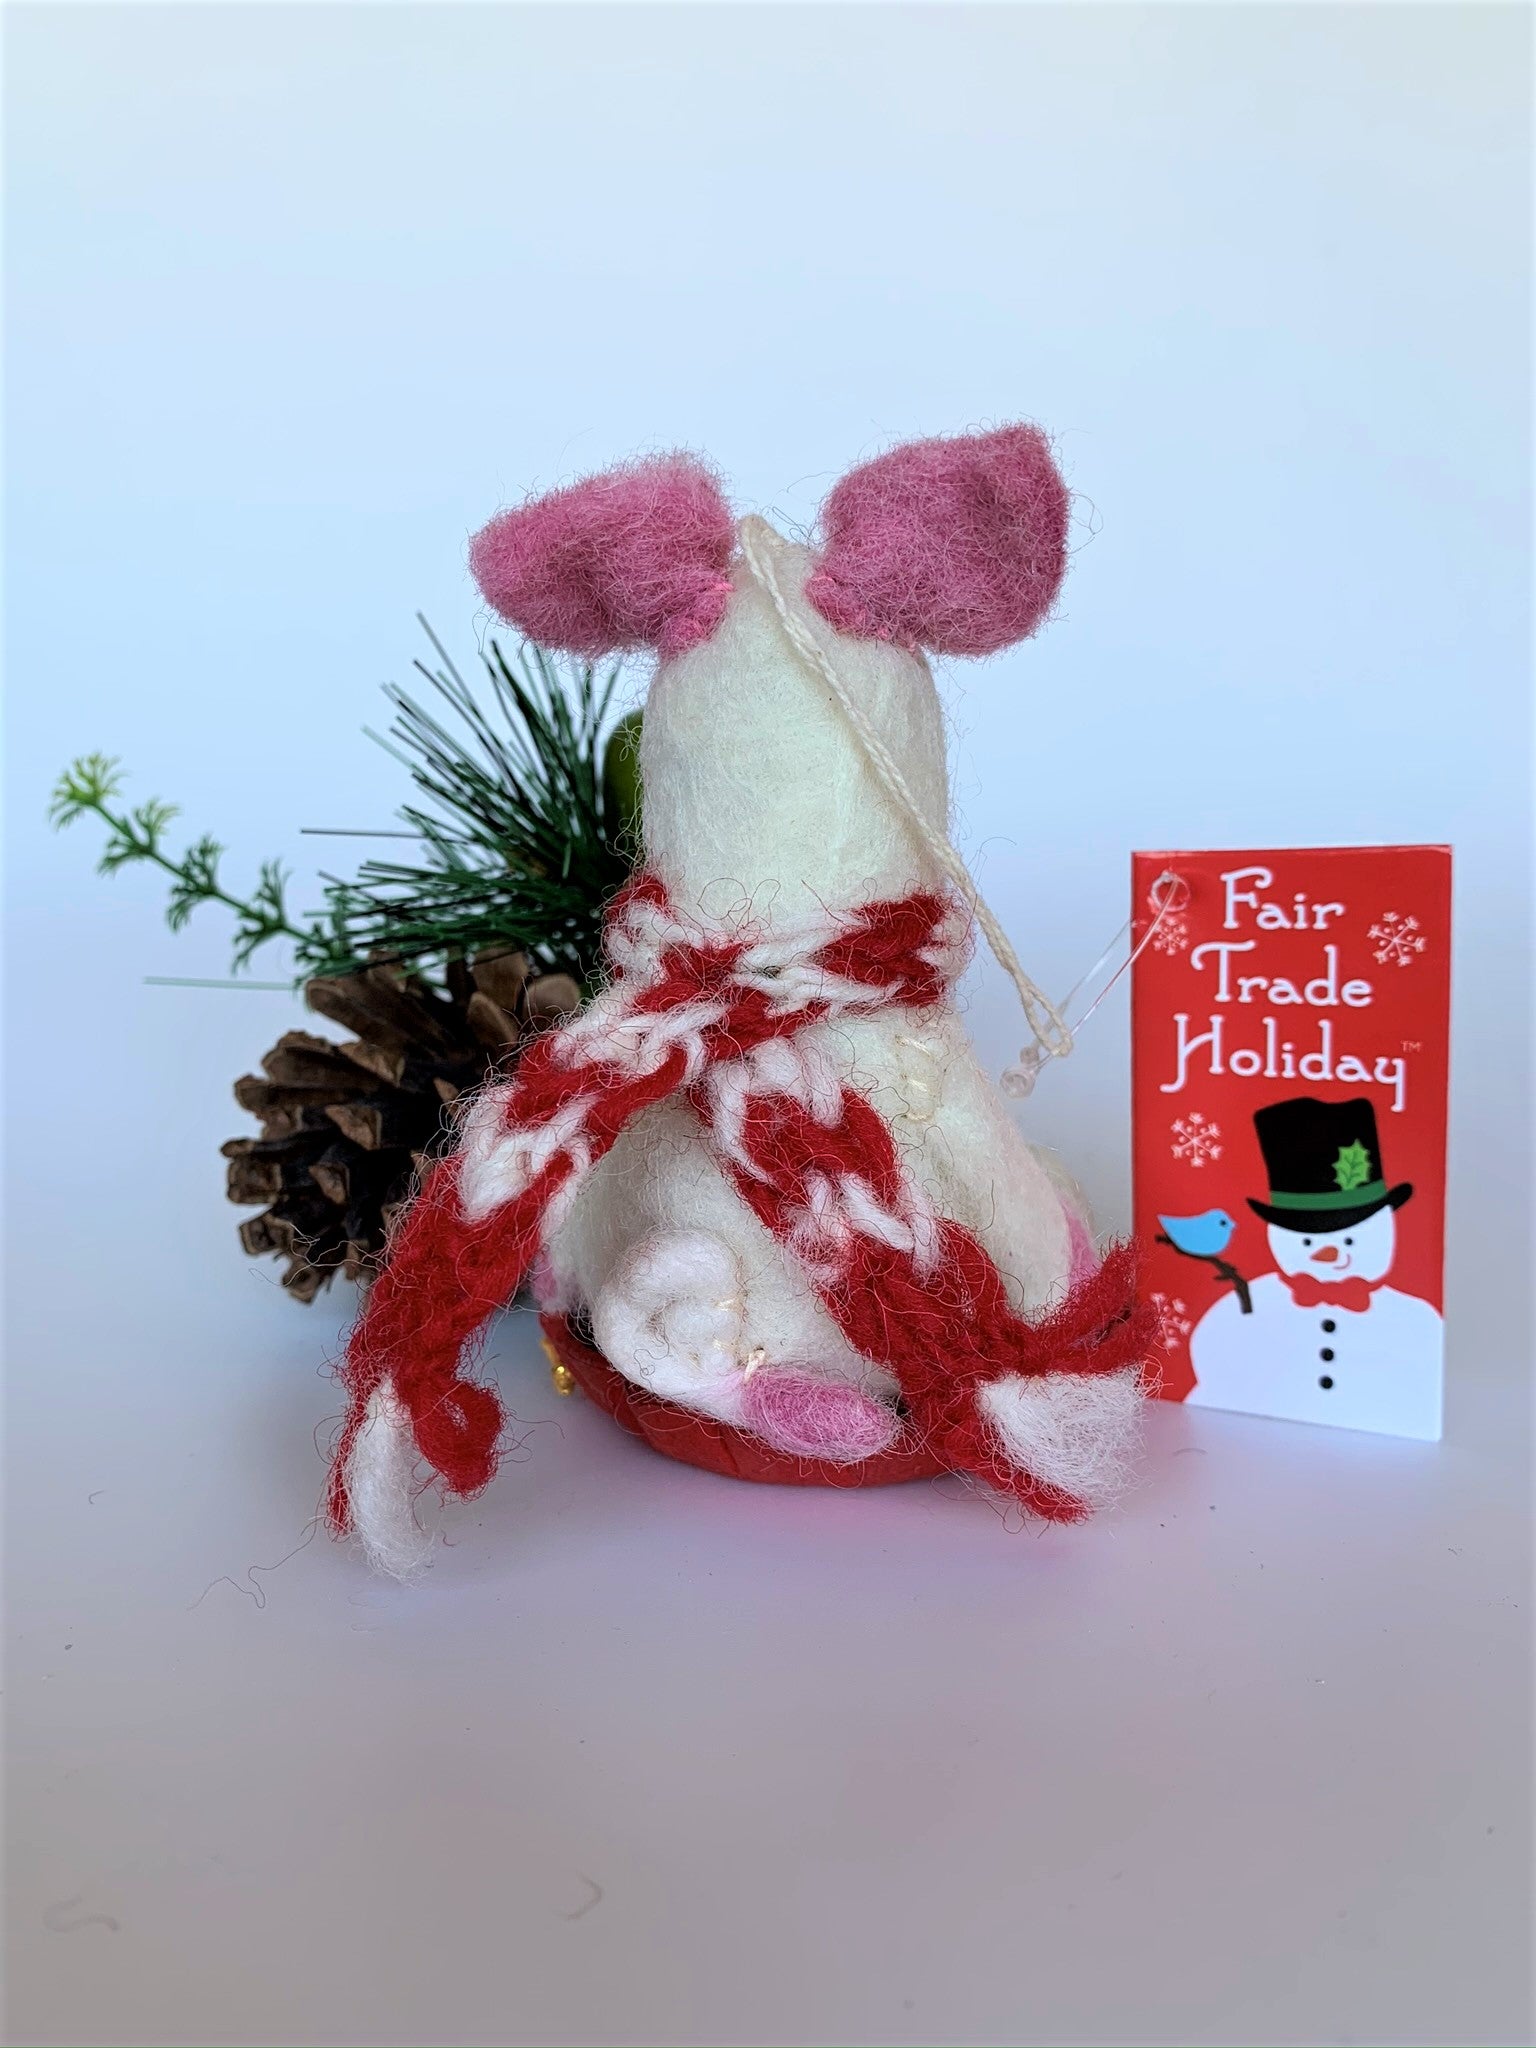 This is a back view of Piggles the sledding piggy Christmas ornament who is handcrafted (fair trade) and made of 100% natural wool. It sits on a round, red sled that is handmade using paper which is hardened and feels almost like thin wood. Piggles is off-white with pink ears, snout and with other pink and black accents (eyes, mouth, etc.). and wears a red & white winter scarf. Approximately 4"x2.75"x2.5". She comes with a detachable fair trade holiday "to/from" tag to use if giving this as a gift.